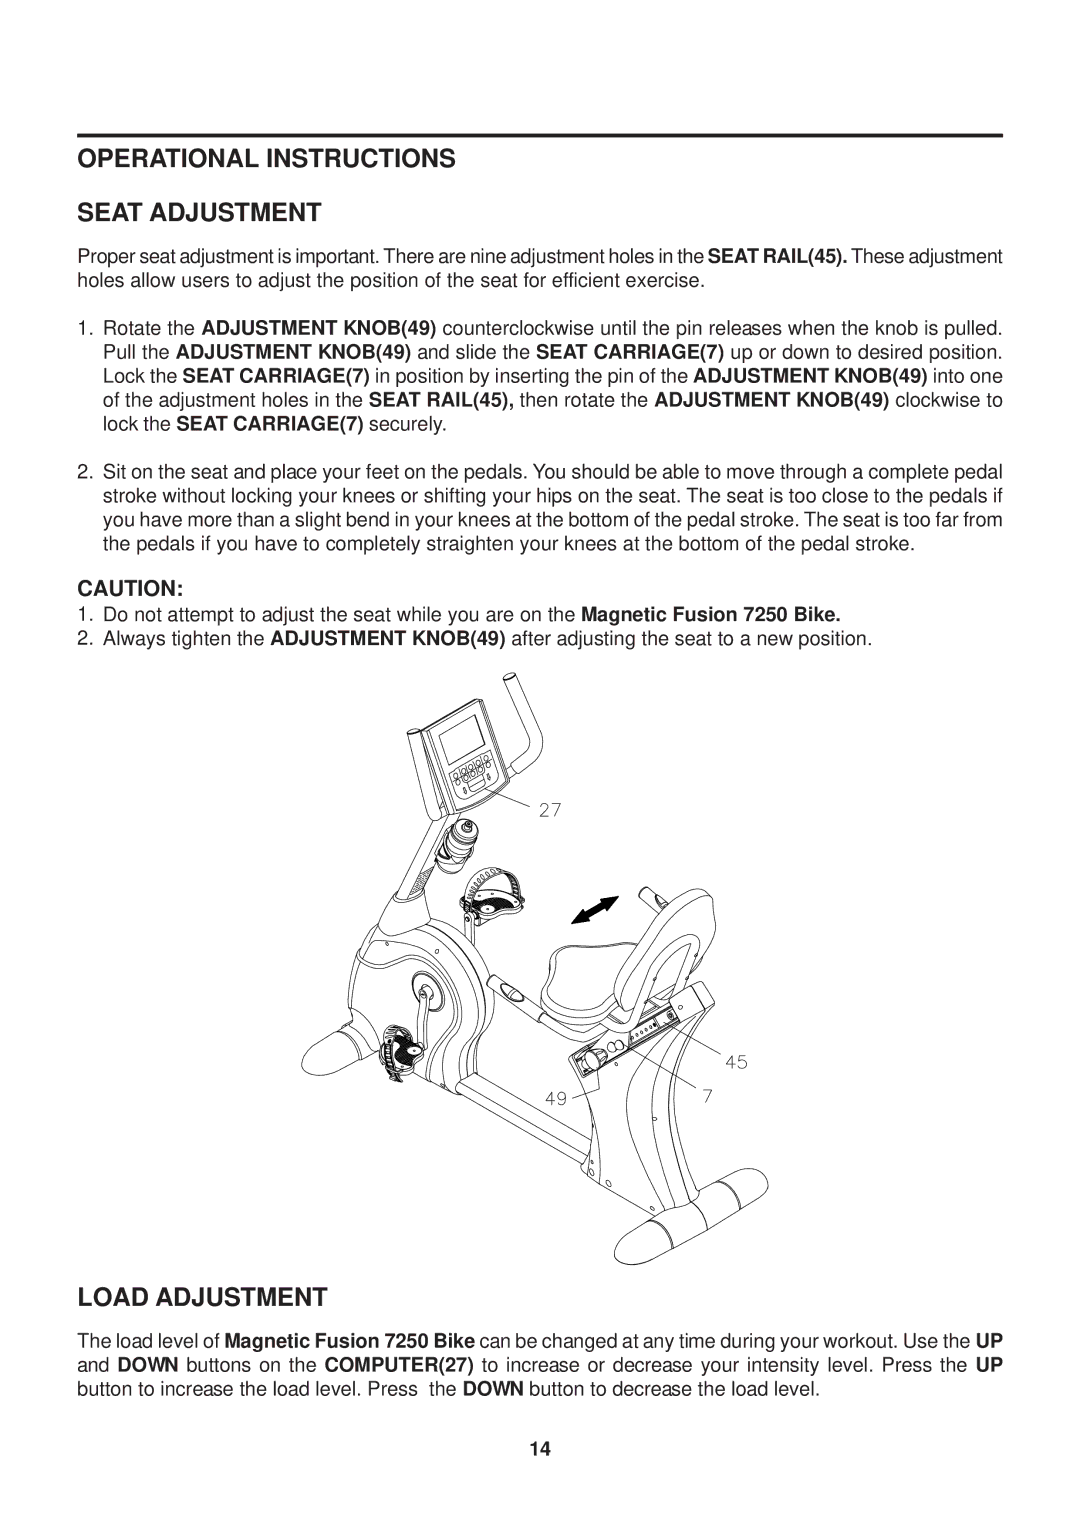 Stamina Products 15-7250 owner manual Operational Instructions Seat Adjustment, Load Adjustment 